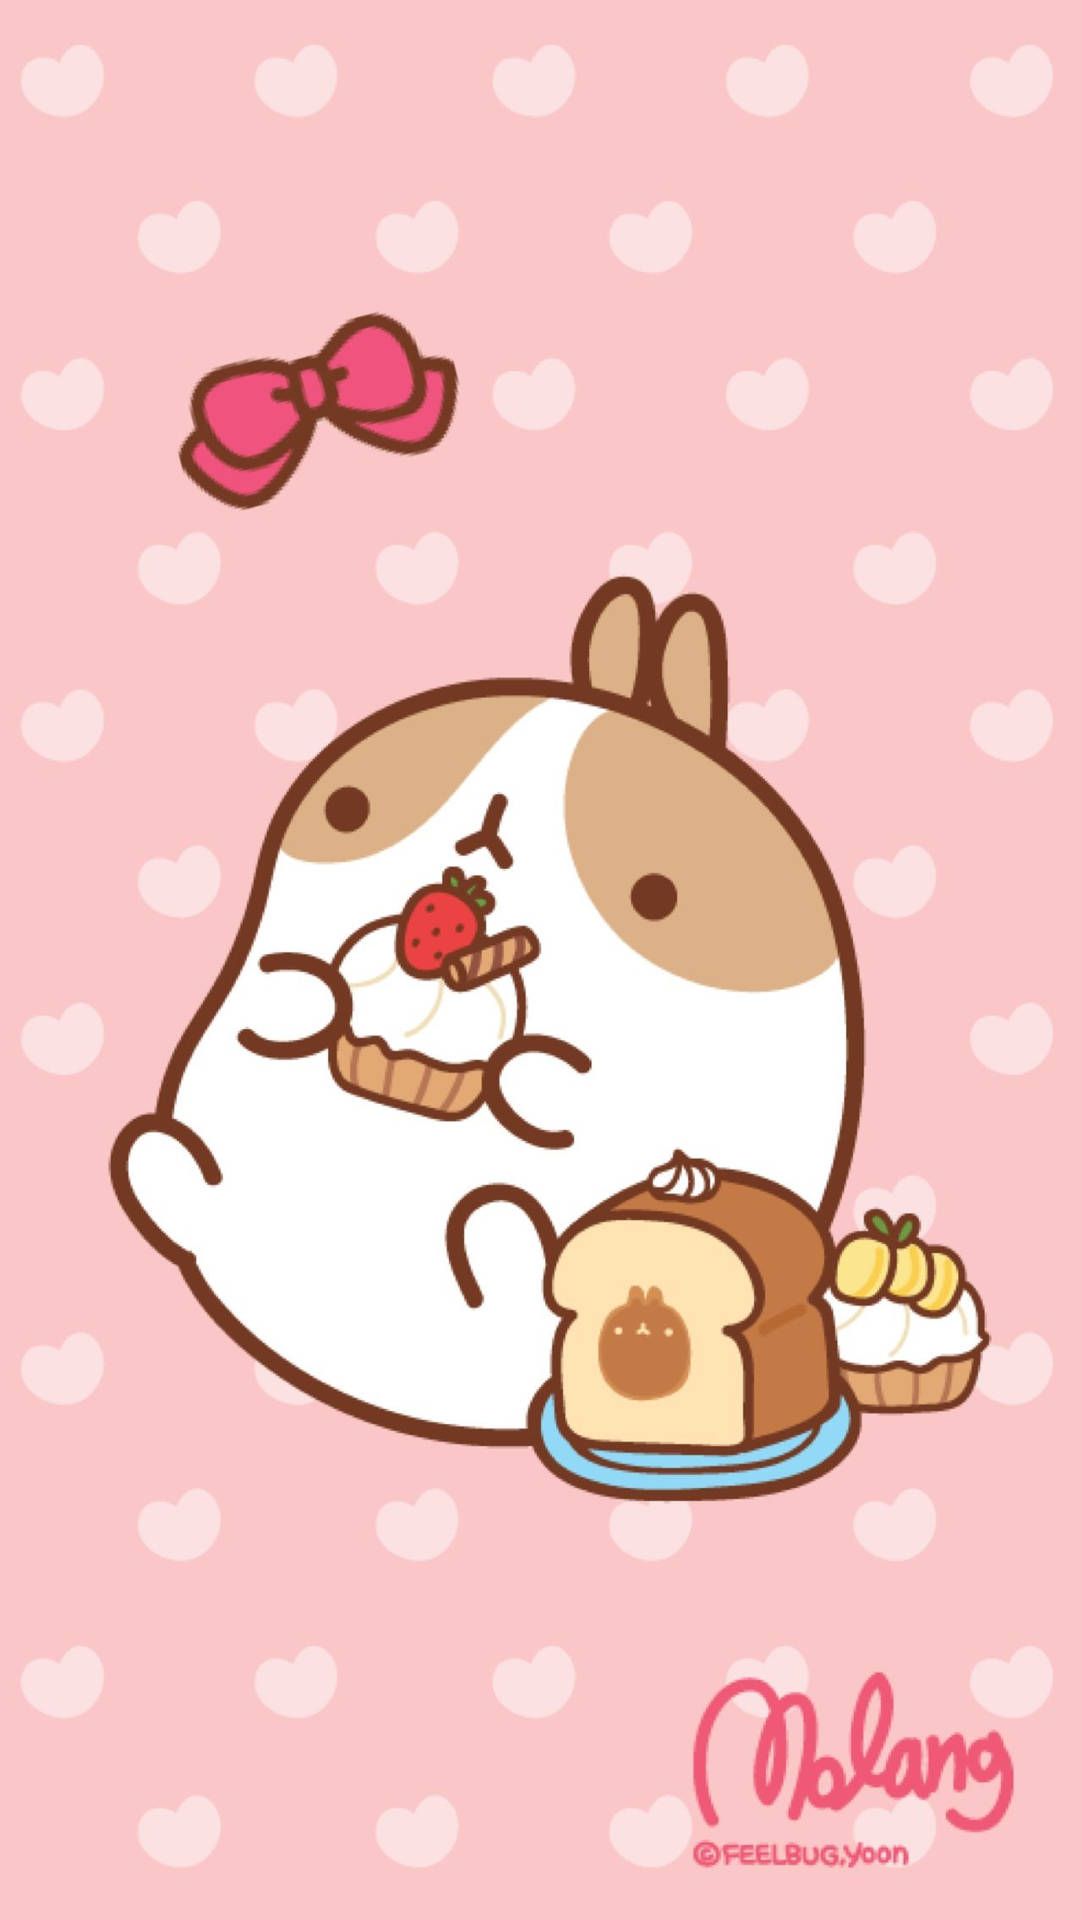 IPhone wallpaper of a cute dog eating bread - Molang